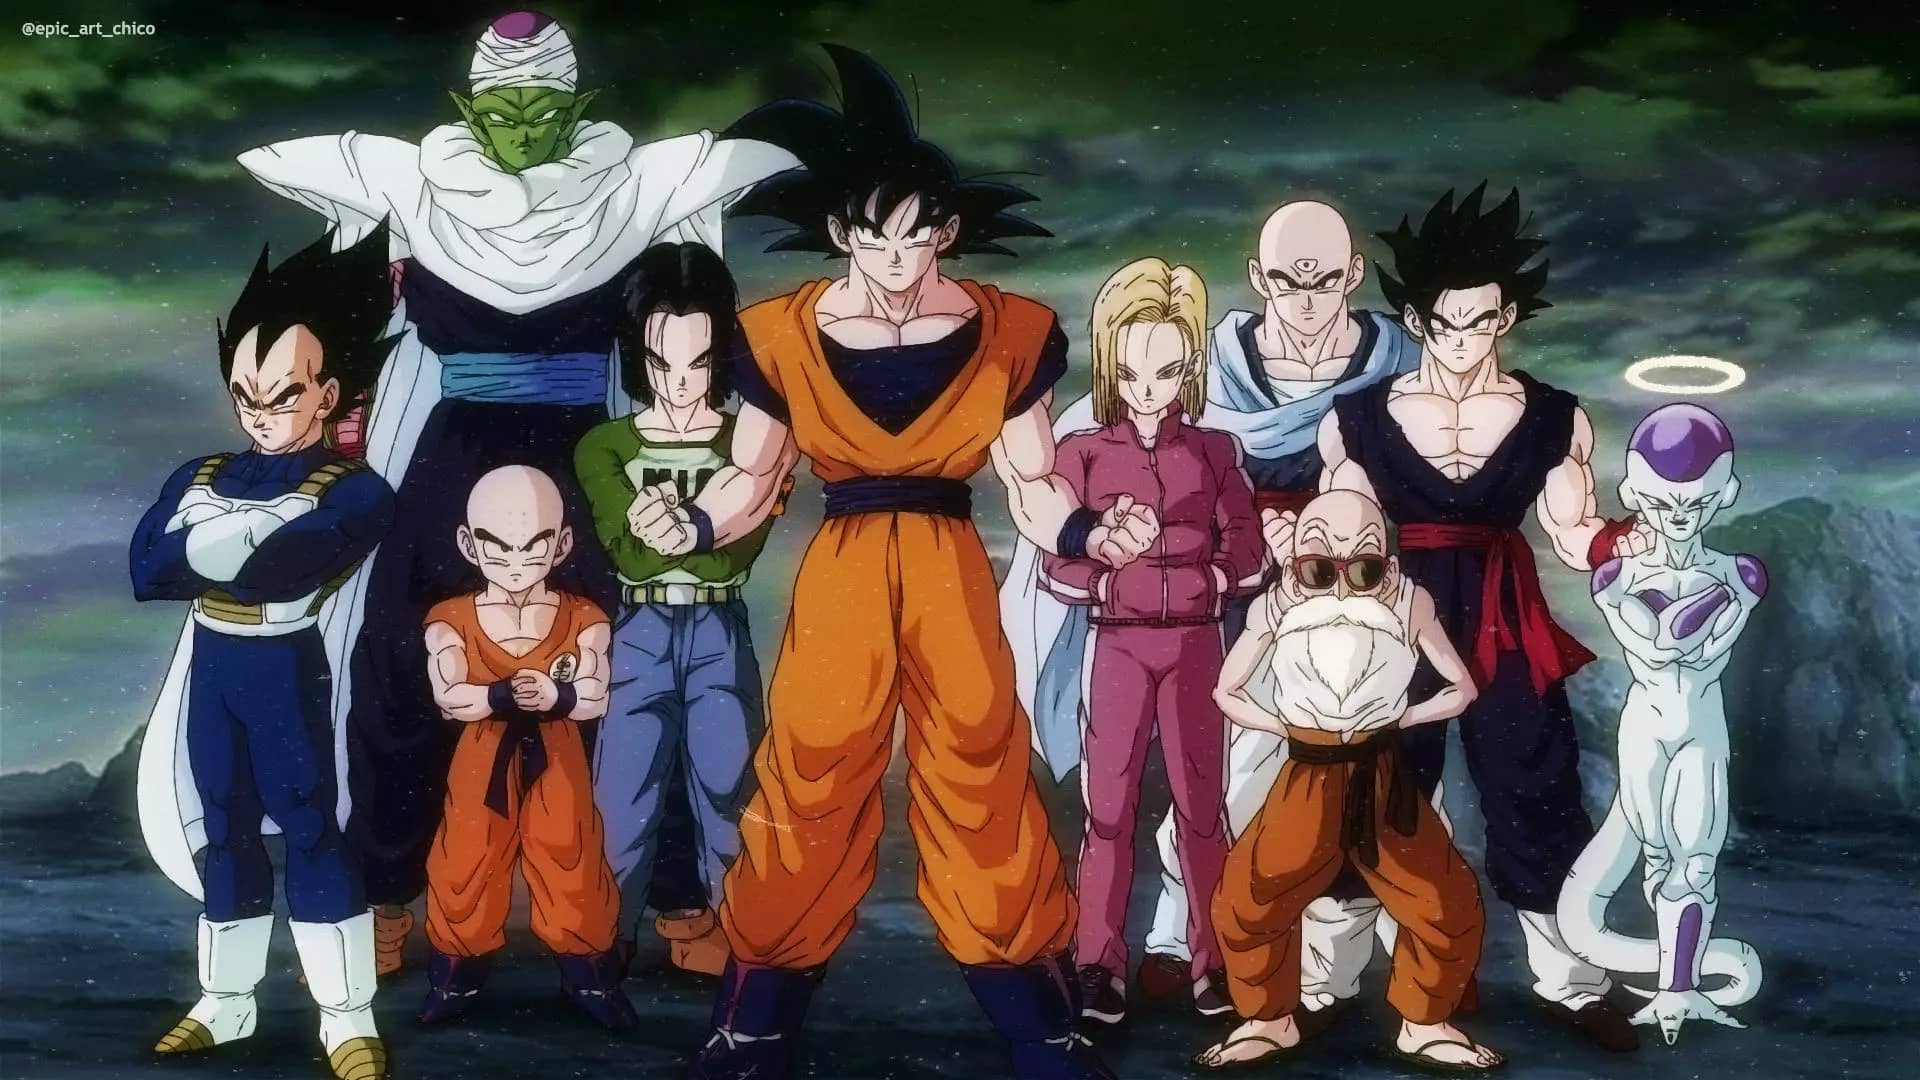 The Z fighters from Dragon ball z